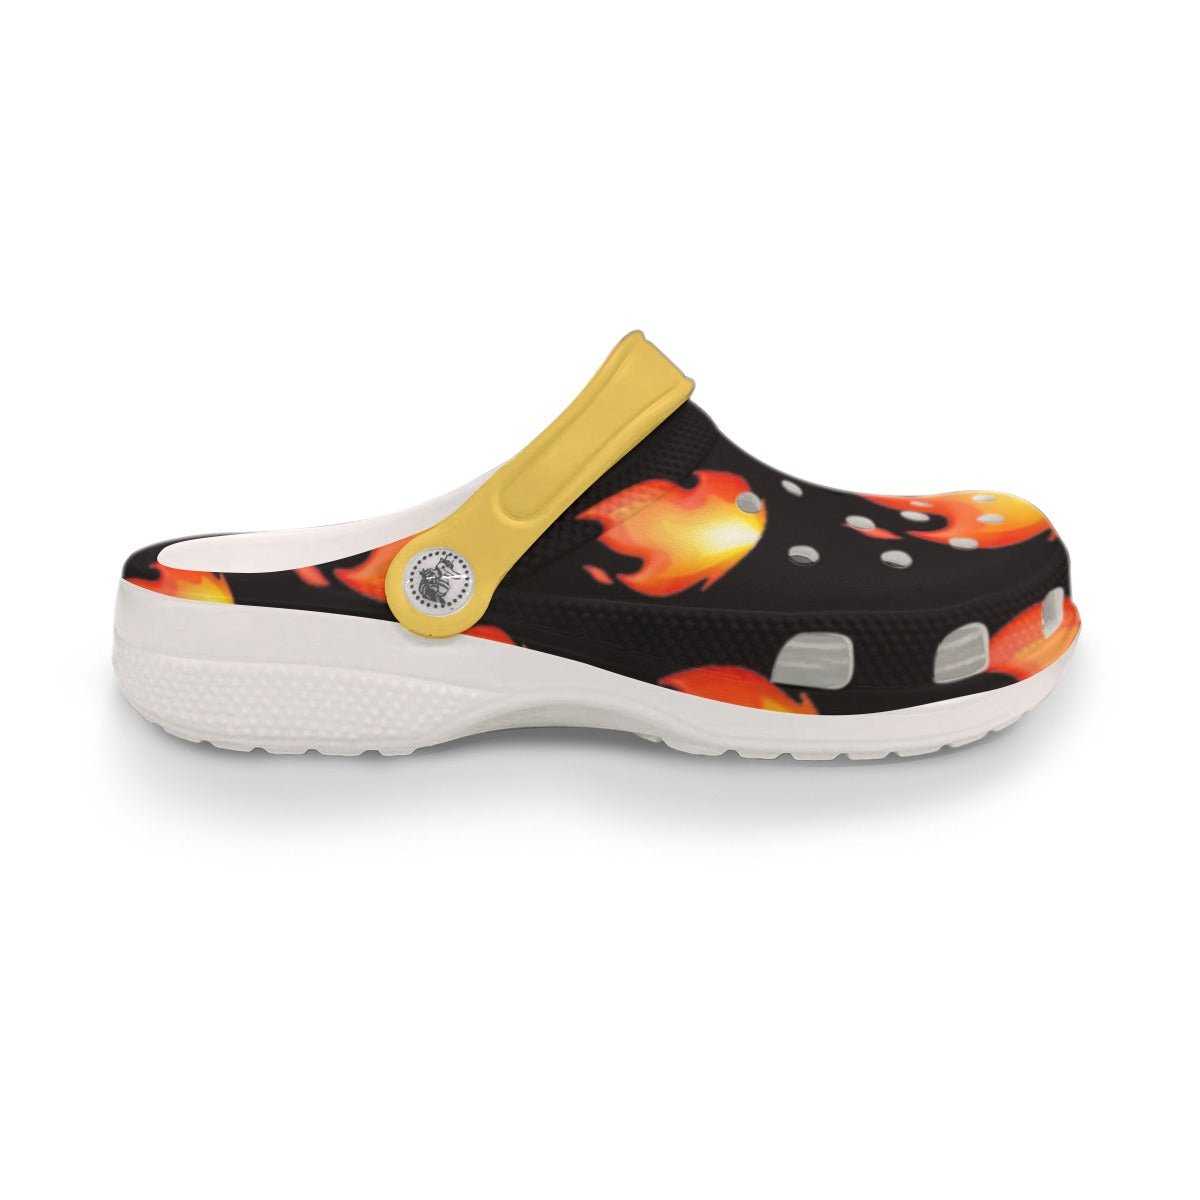 DQM - Flaming Unisex Clog Sandals - dragqueenmerch